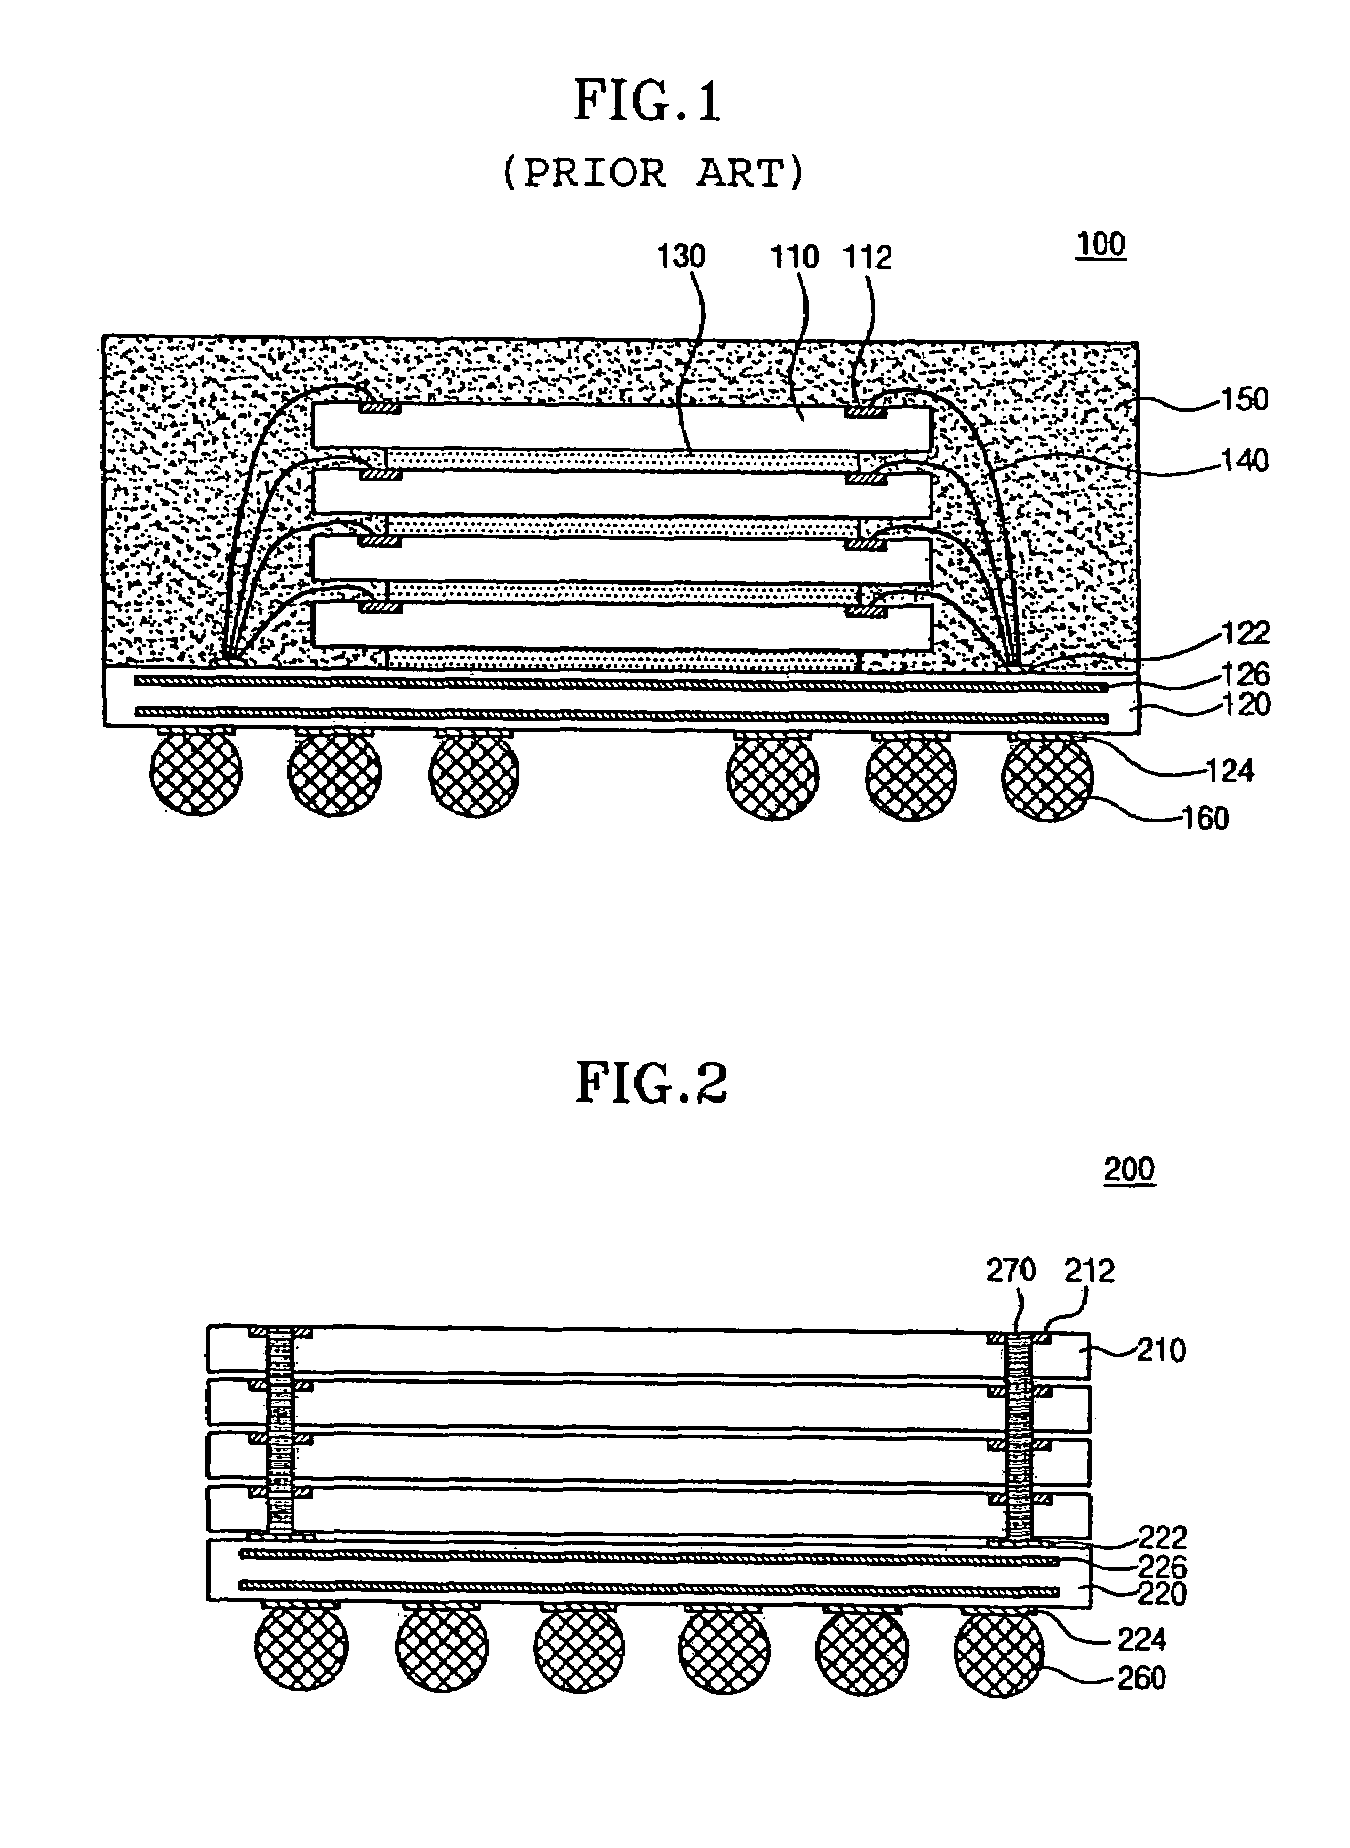 Through silicon via chip stack package capable of facilitating chip selection during device operation